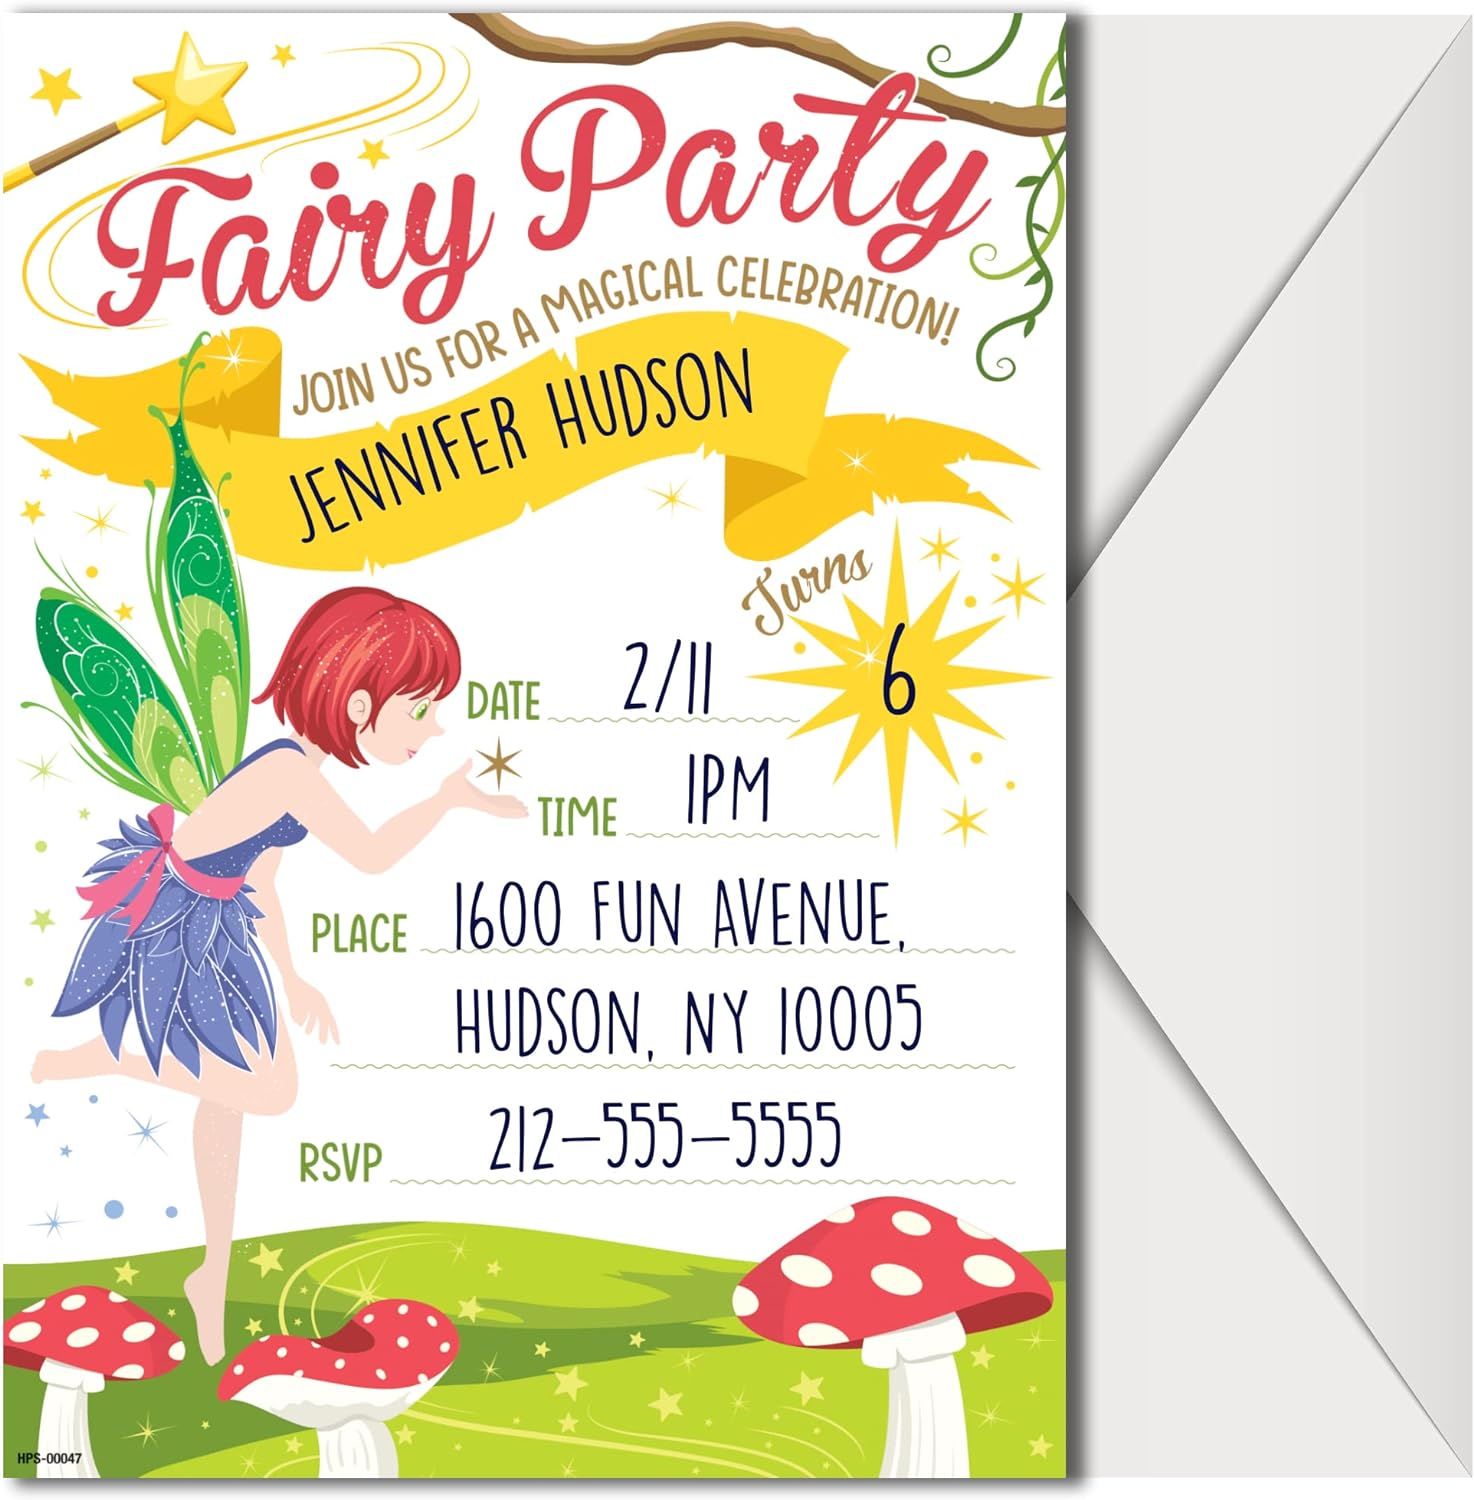 Fairy Party Invitations with Envelopes - (Pack of 20)